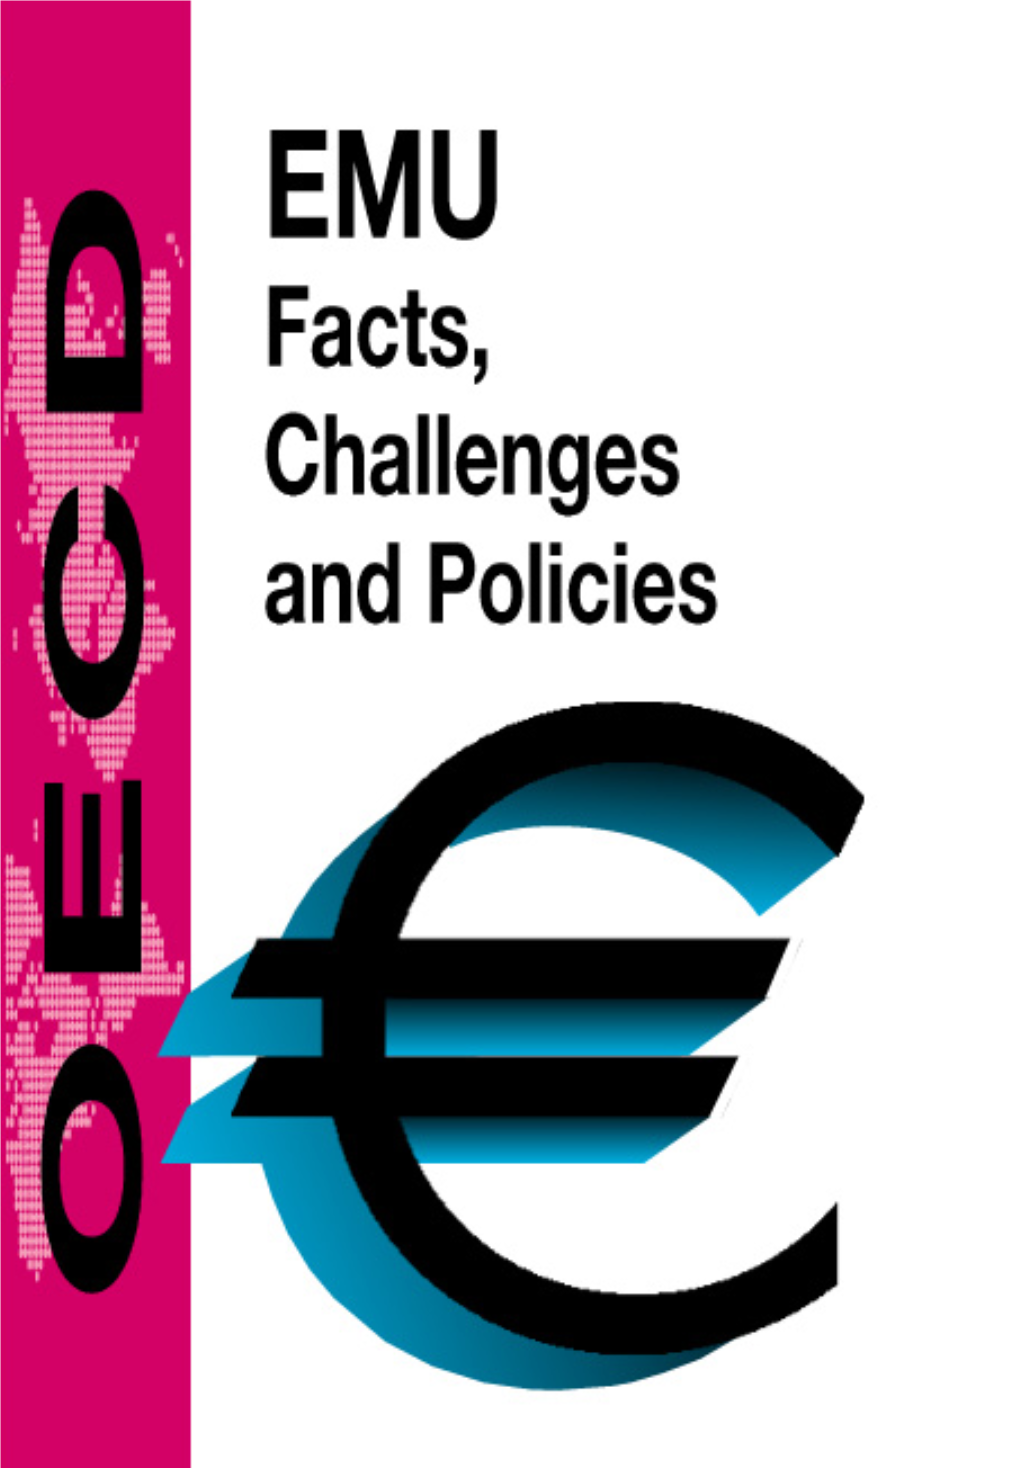 EMU Facts Challenges and Policies